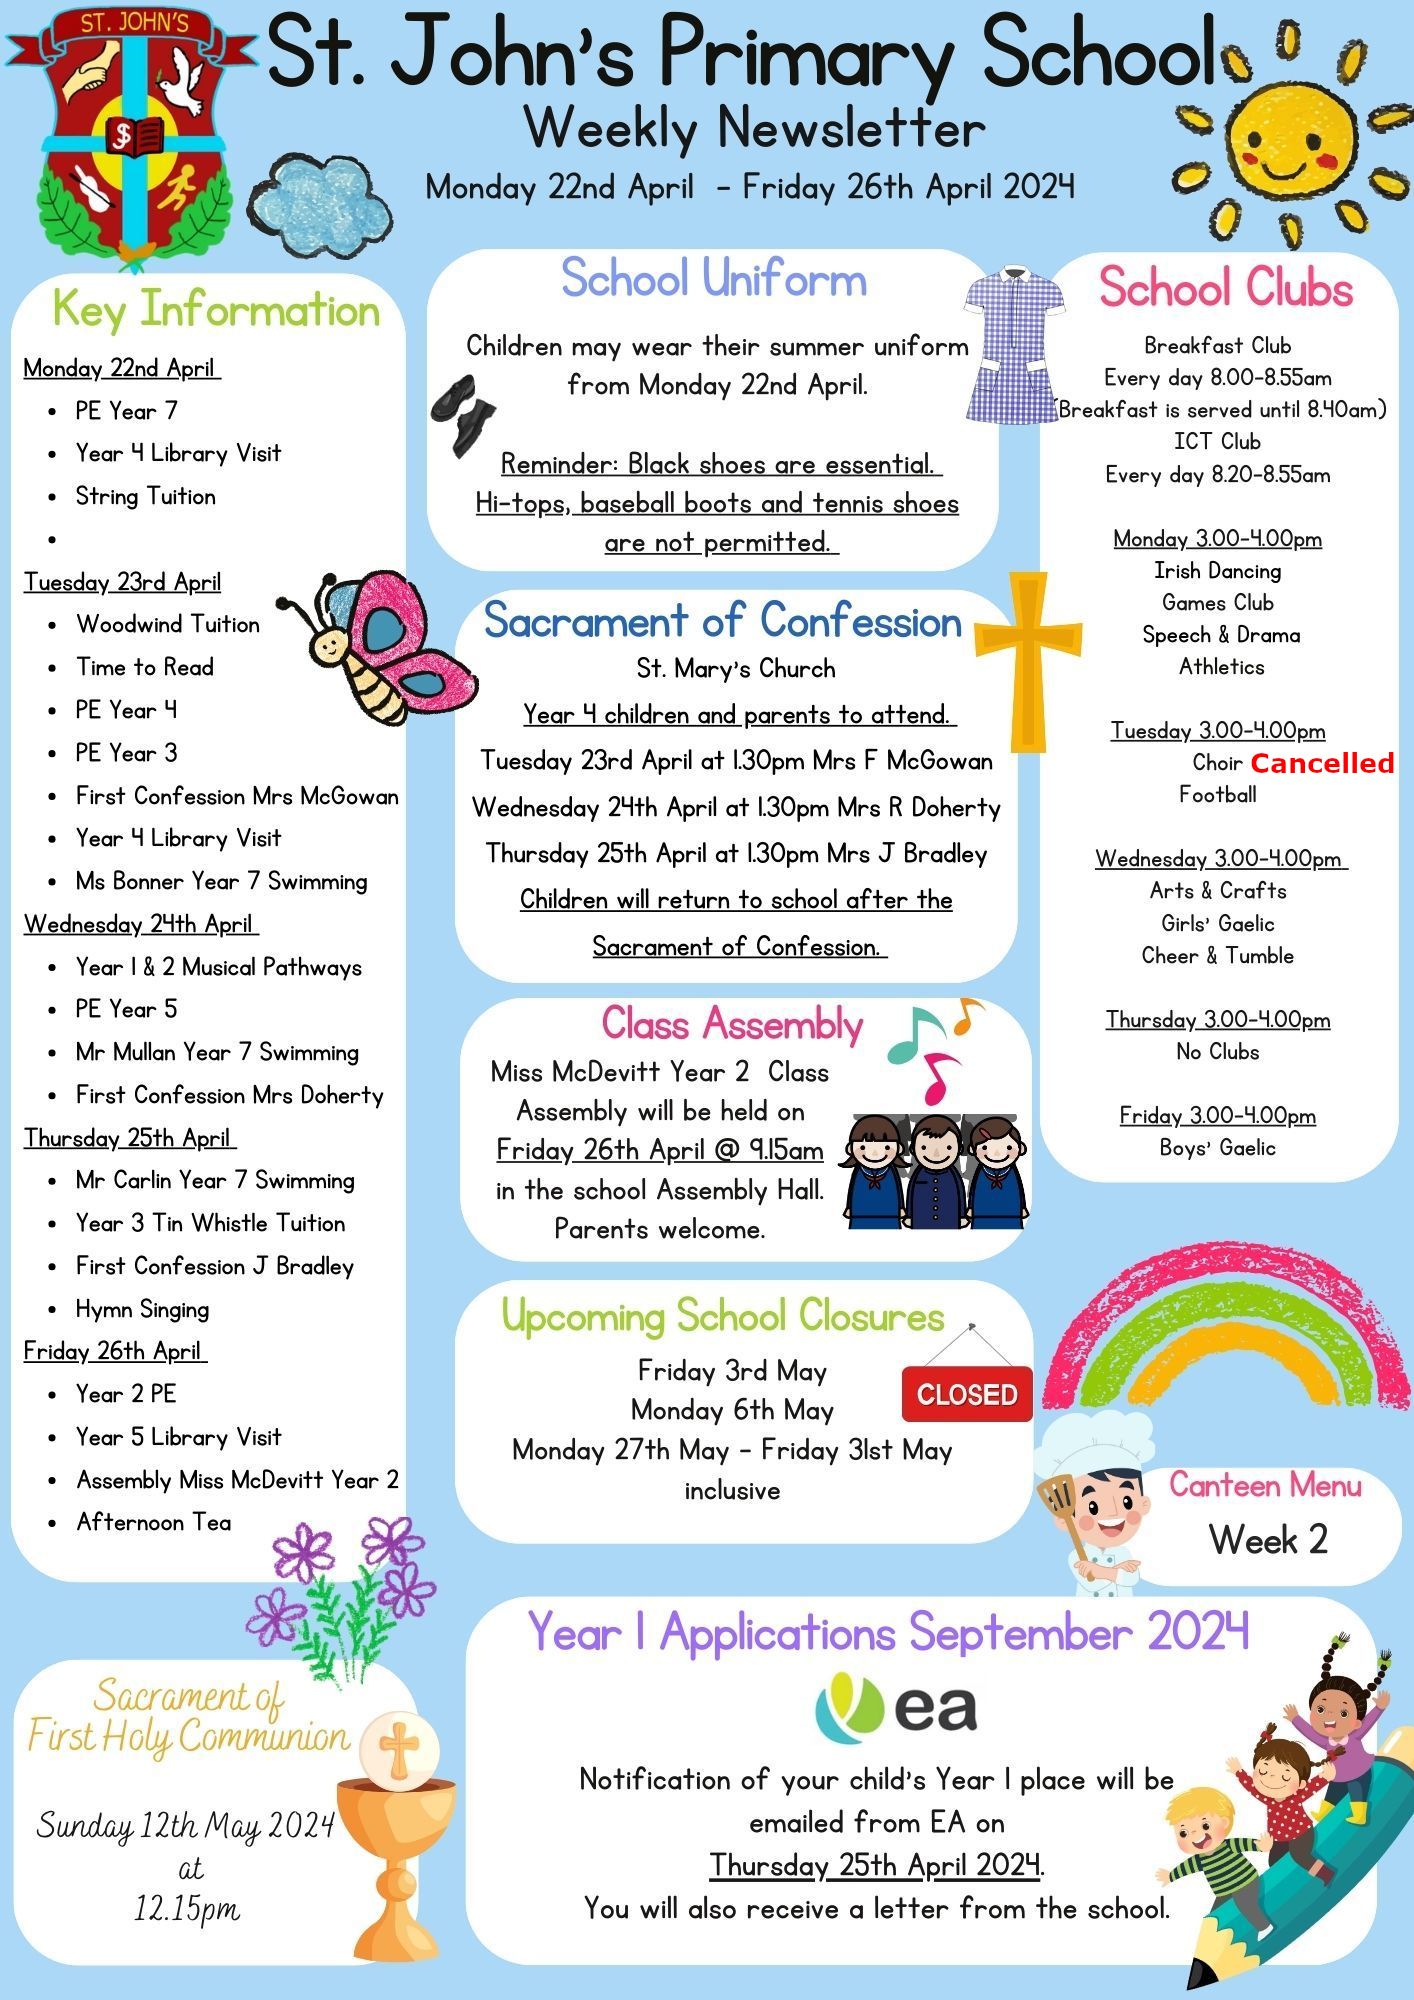 Weekly Newsletter Monday 22nd April 2024